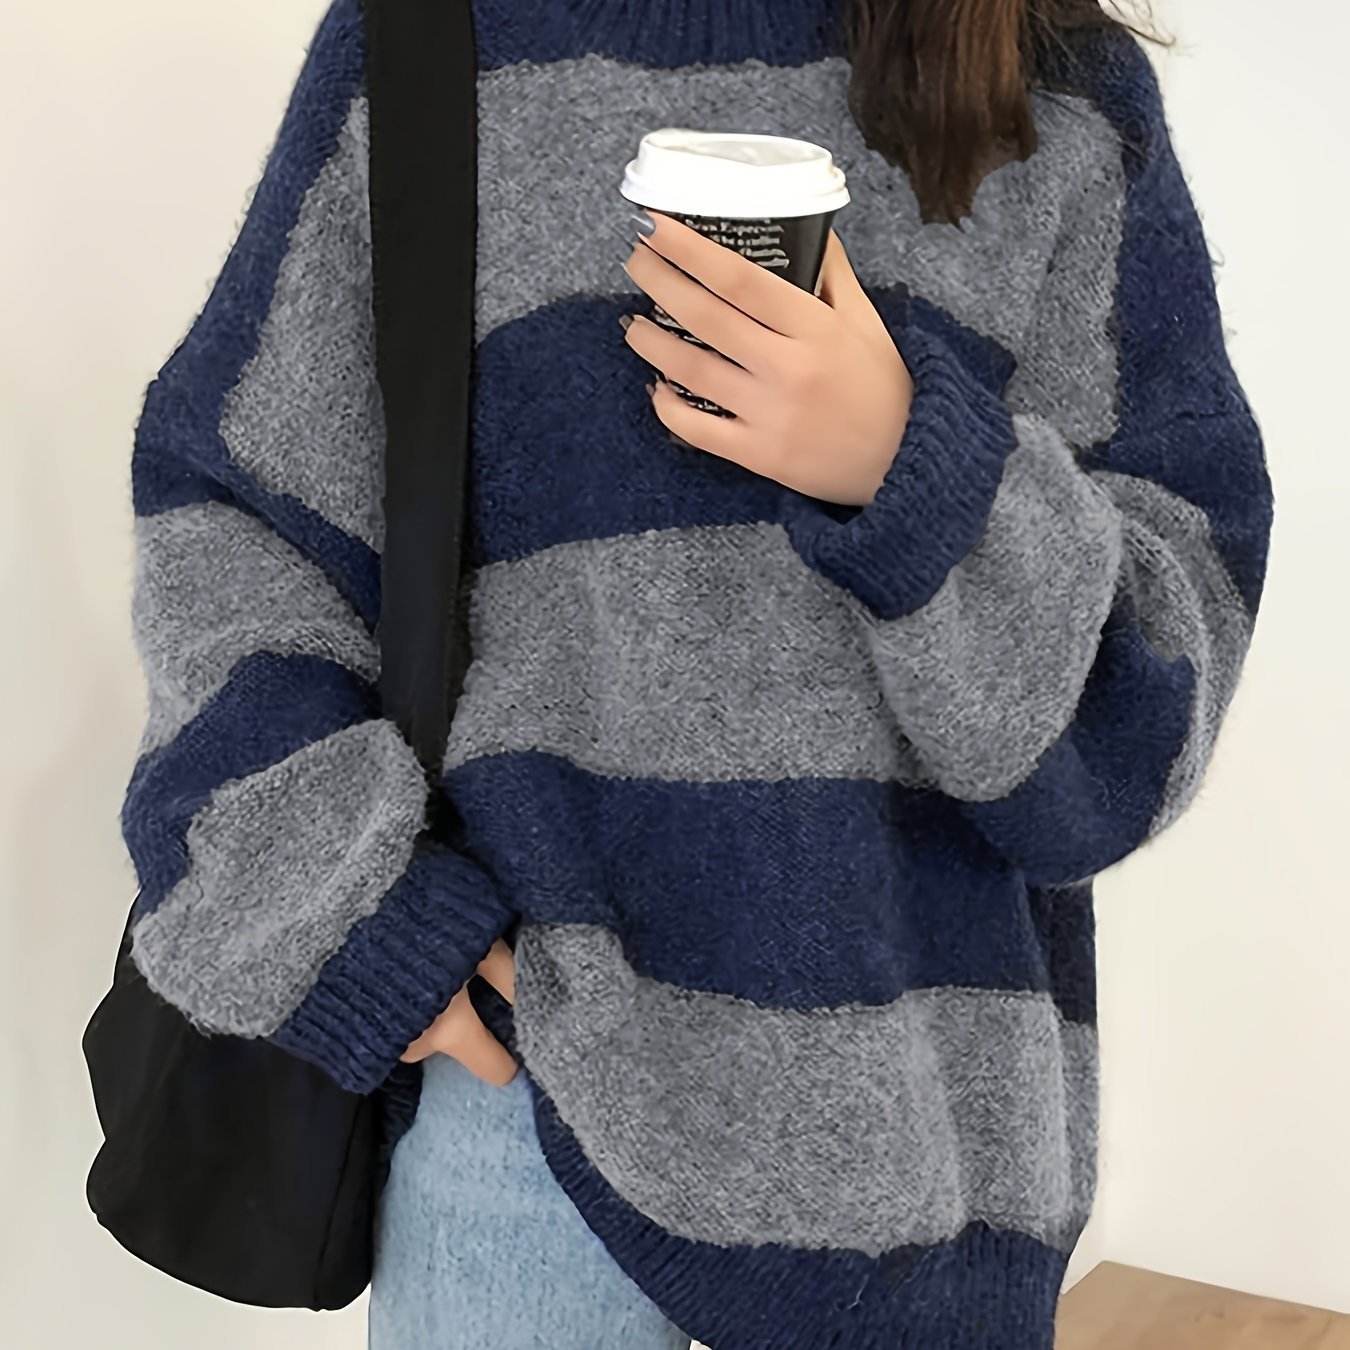 Colorblock Oversized Knitted Pullover Top, Vintage Crew Neck Long ...